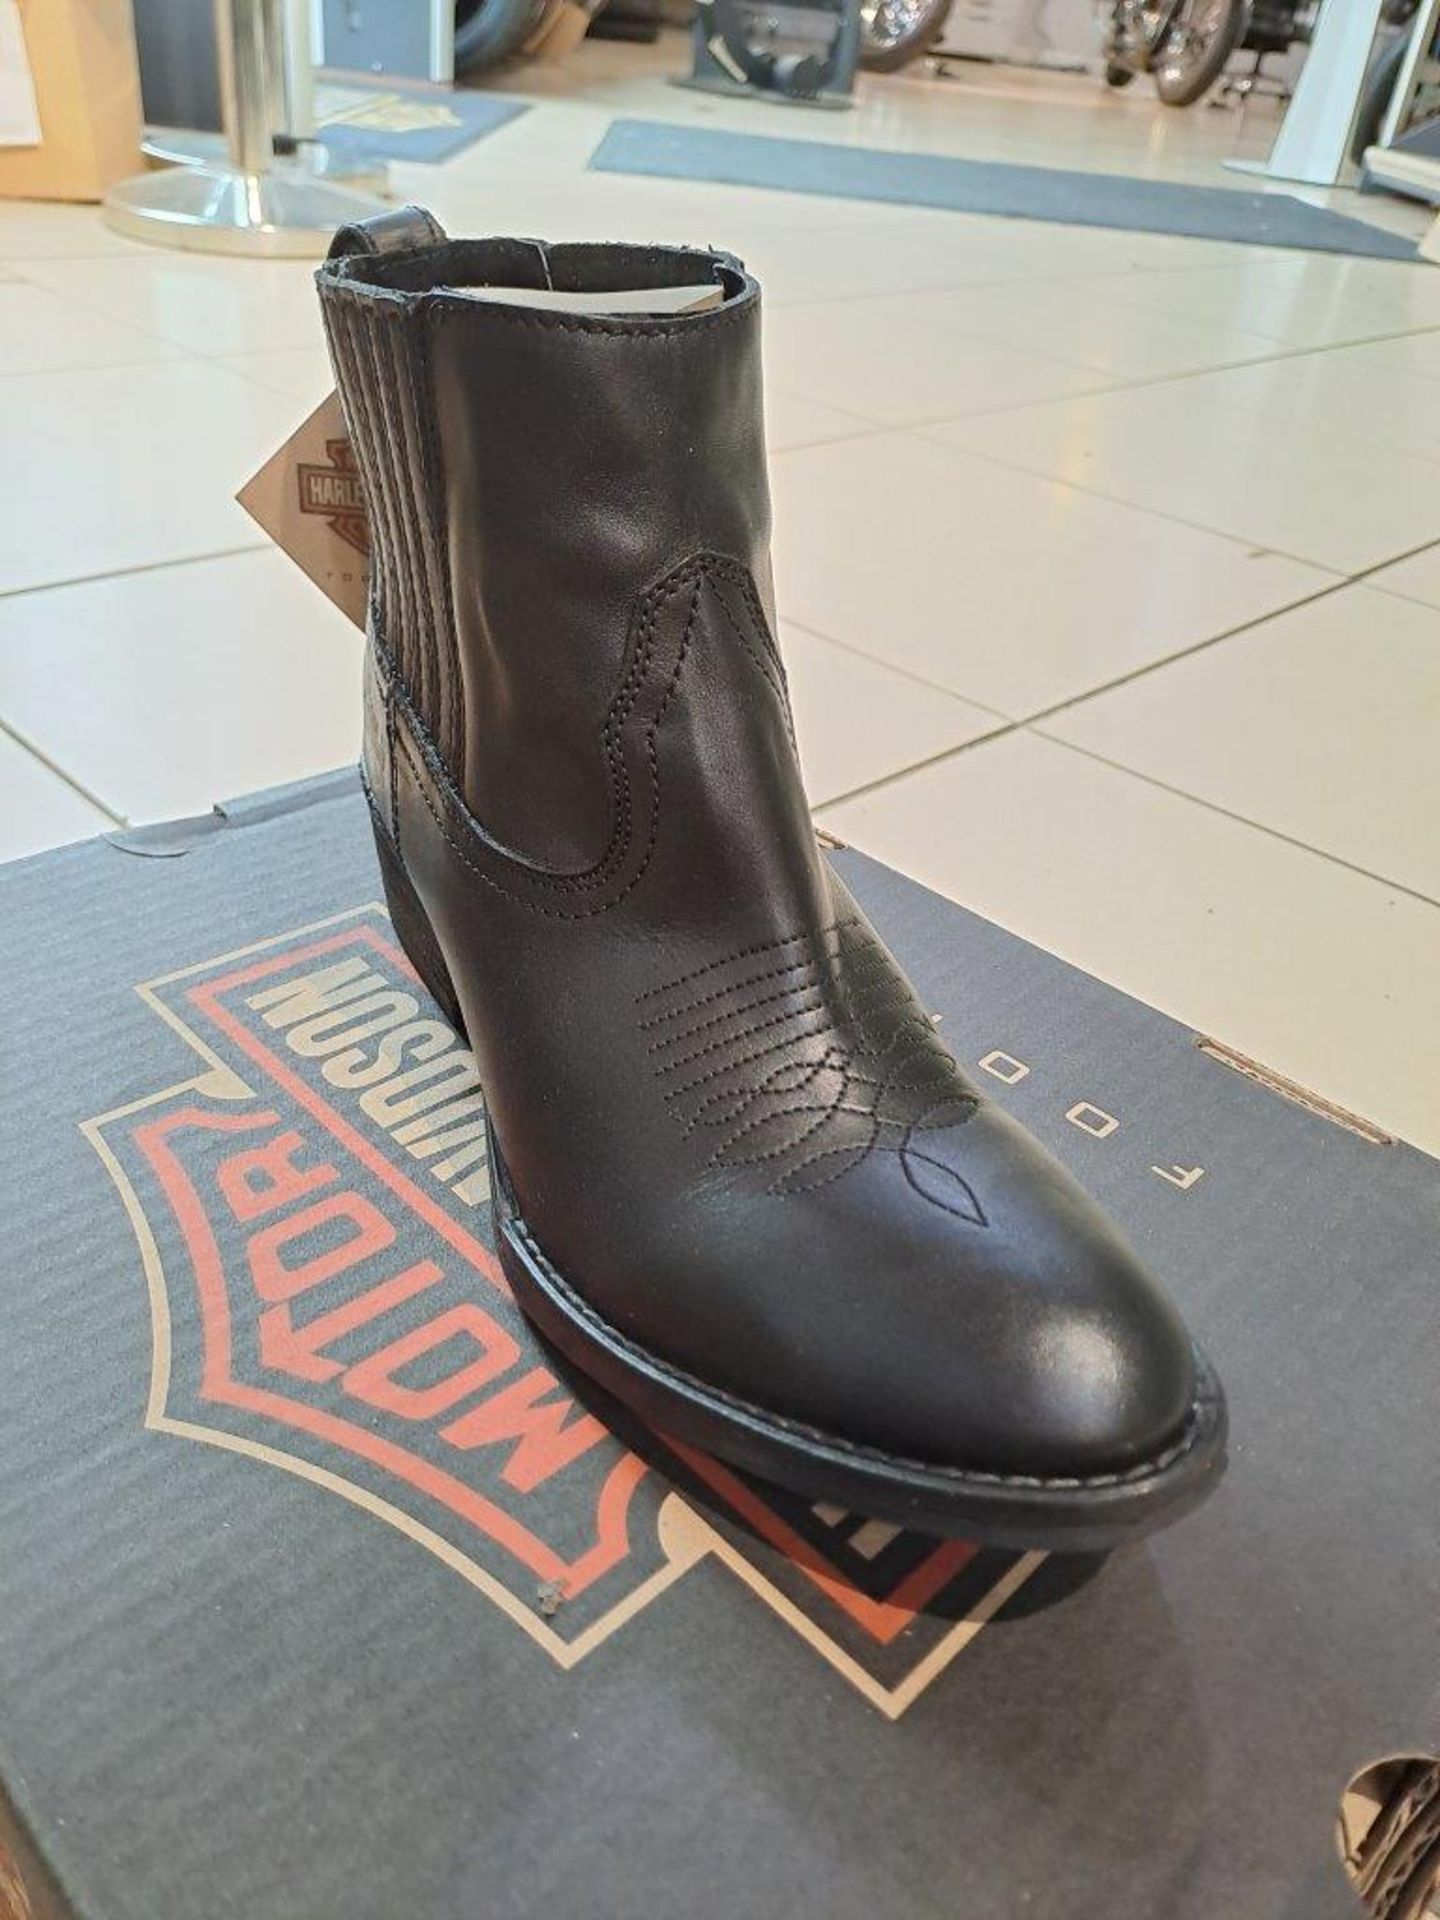 Harley Davidson Curwood Size 7.5 Womens Boots - Image 4 of 8